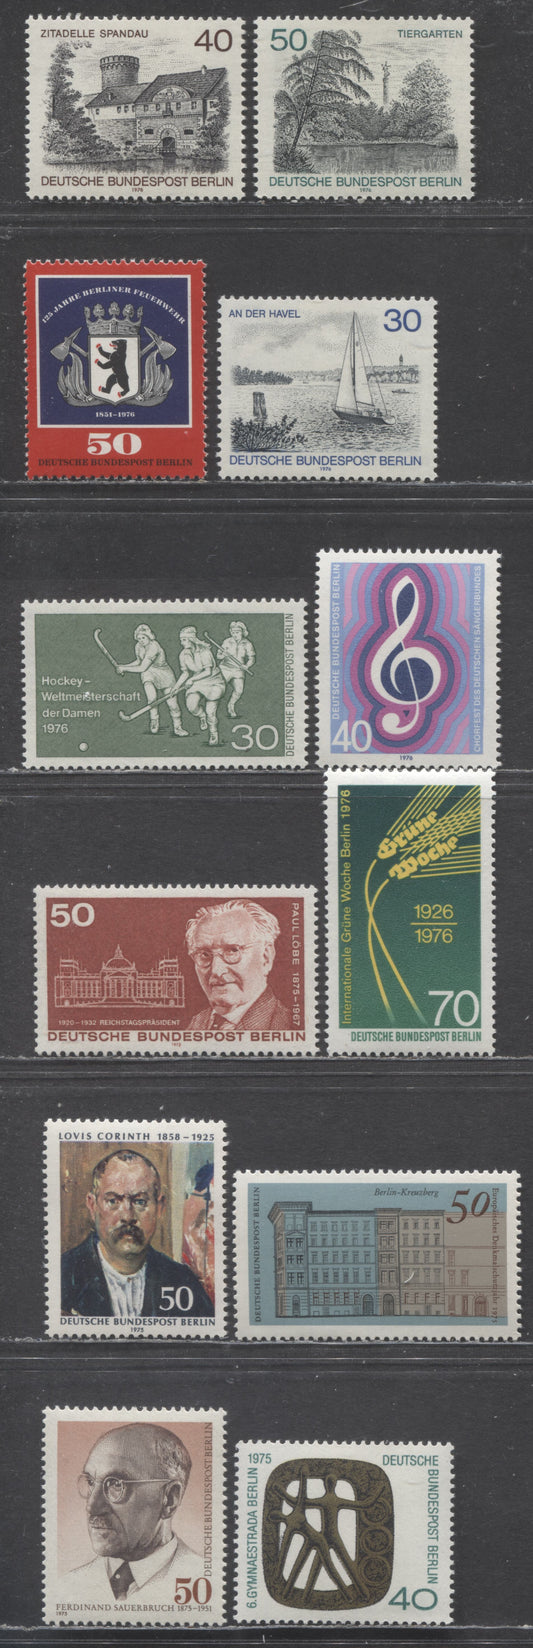 Berlin-Germany SC#9N379-9N390(Mi#492/531) 1972 Saurbruch - Berlin Views Issues, 12 VFNH Singles, Click on Listing to See ALL Pictures, Estimated Value $10 USD